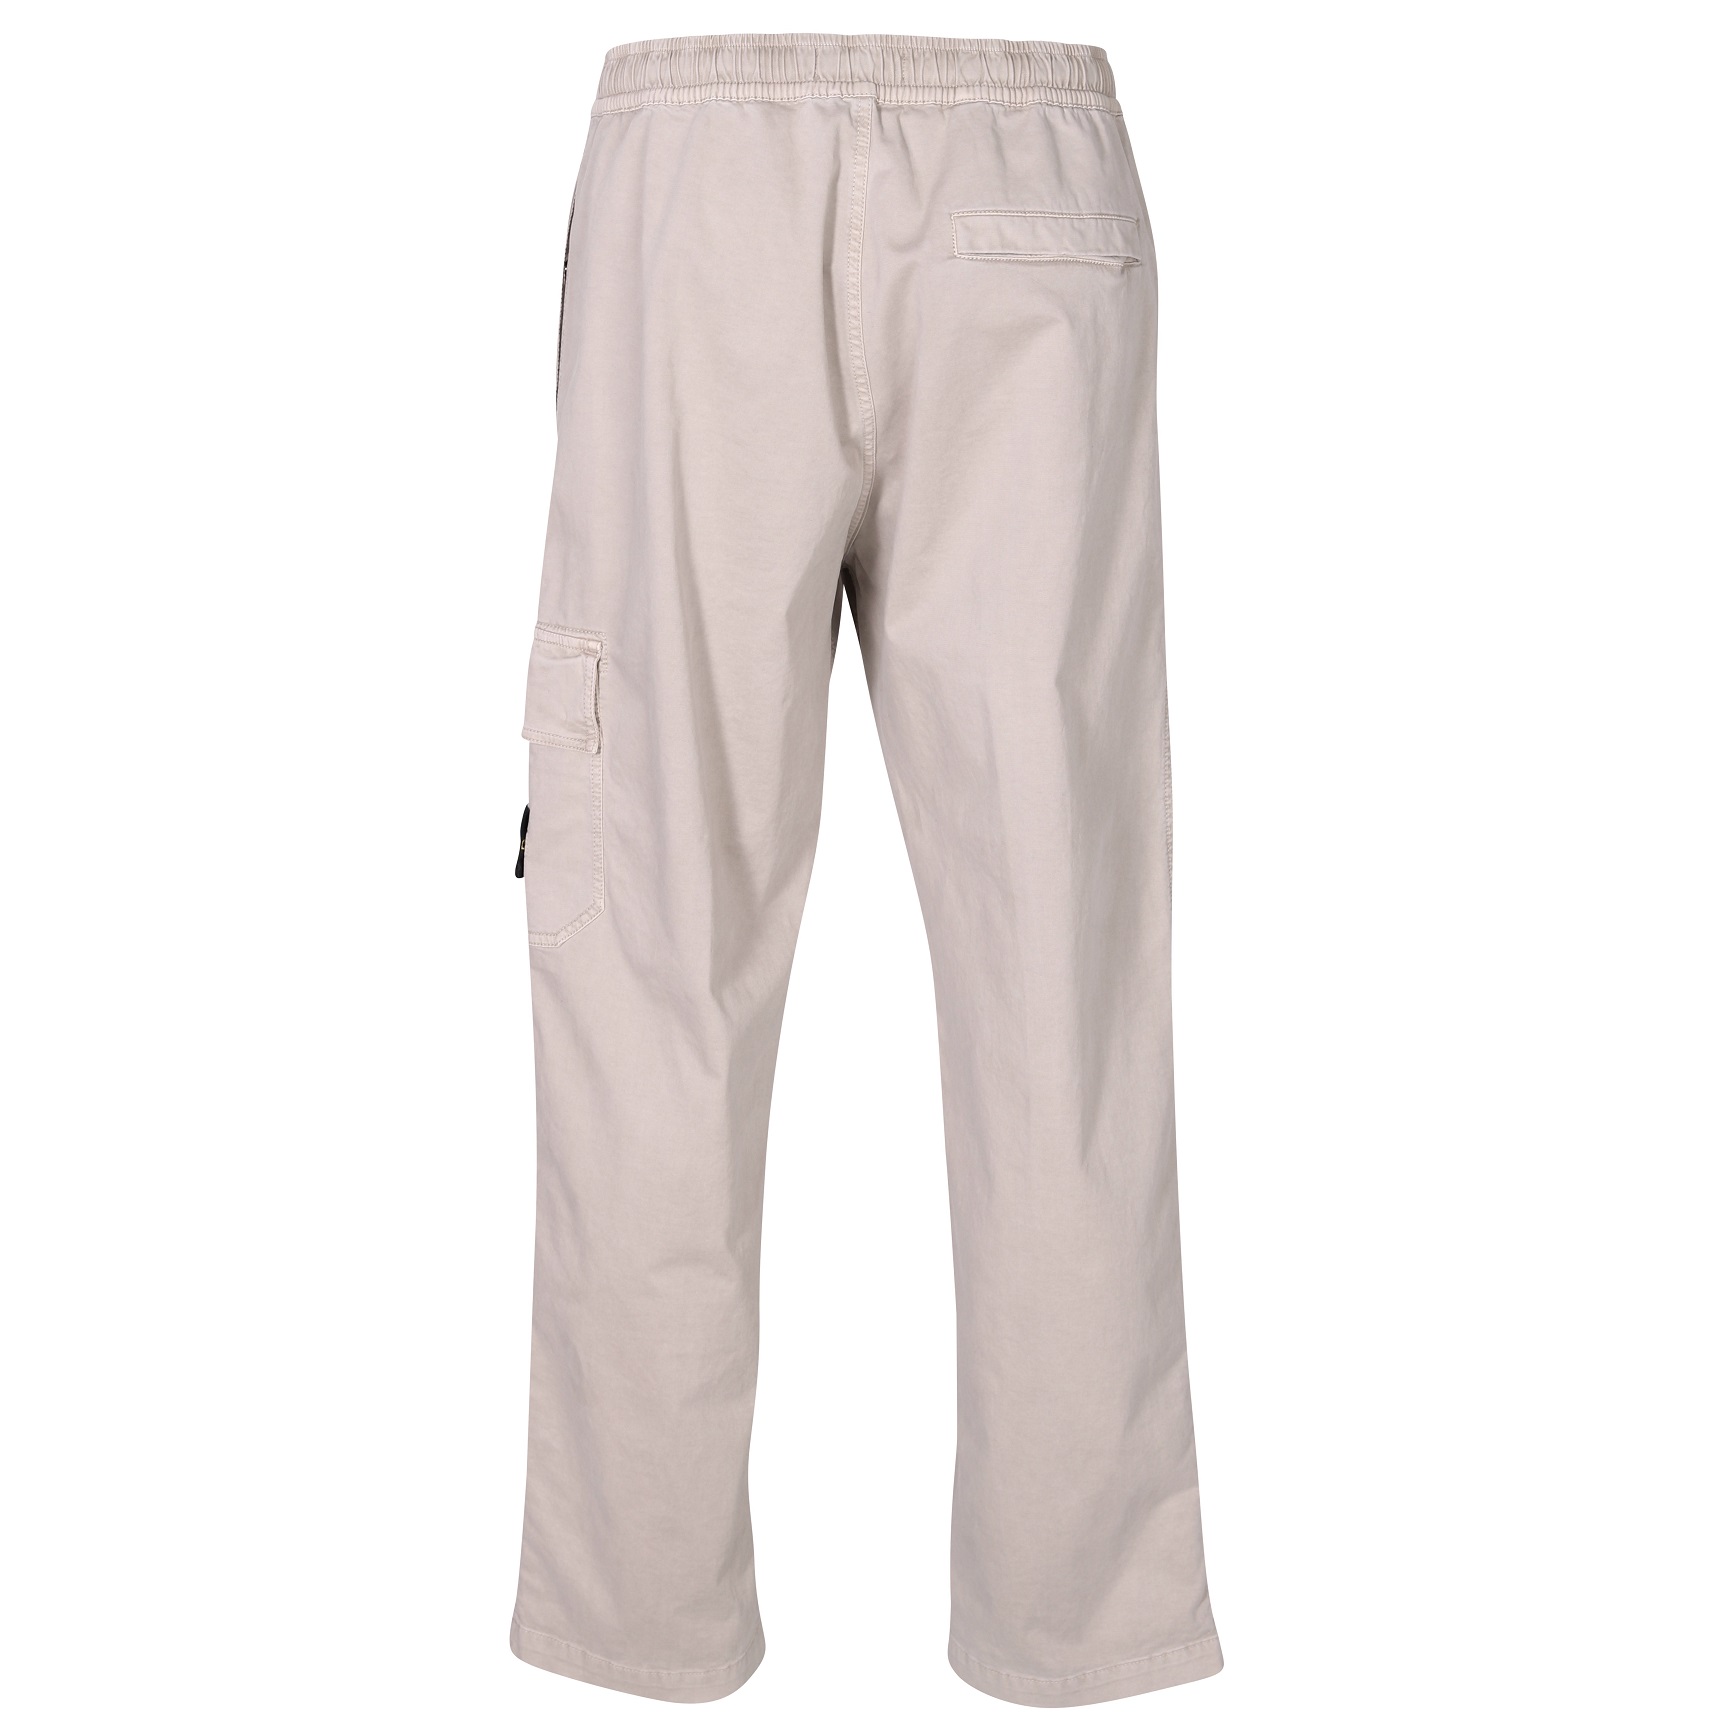 STONE ISLAND Loose Cargo Pant in Washed Dove Grey 31